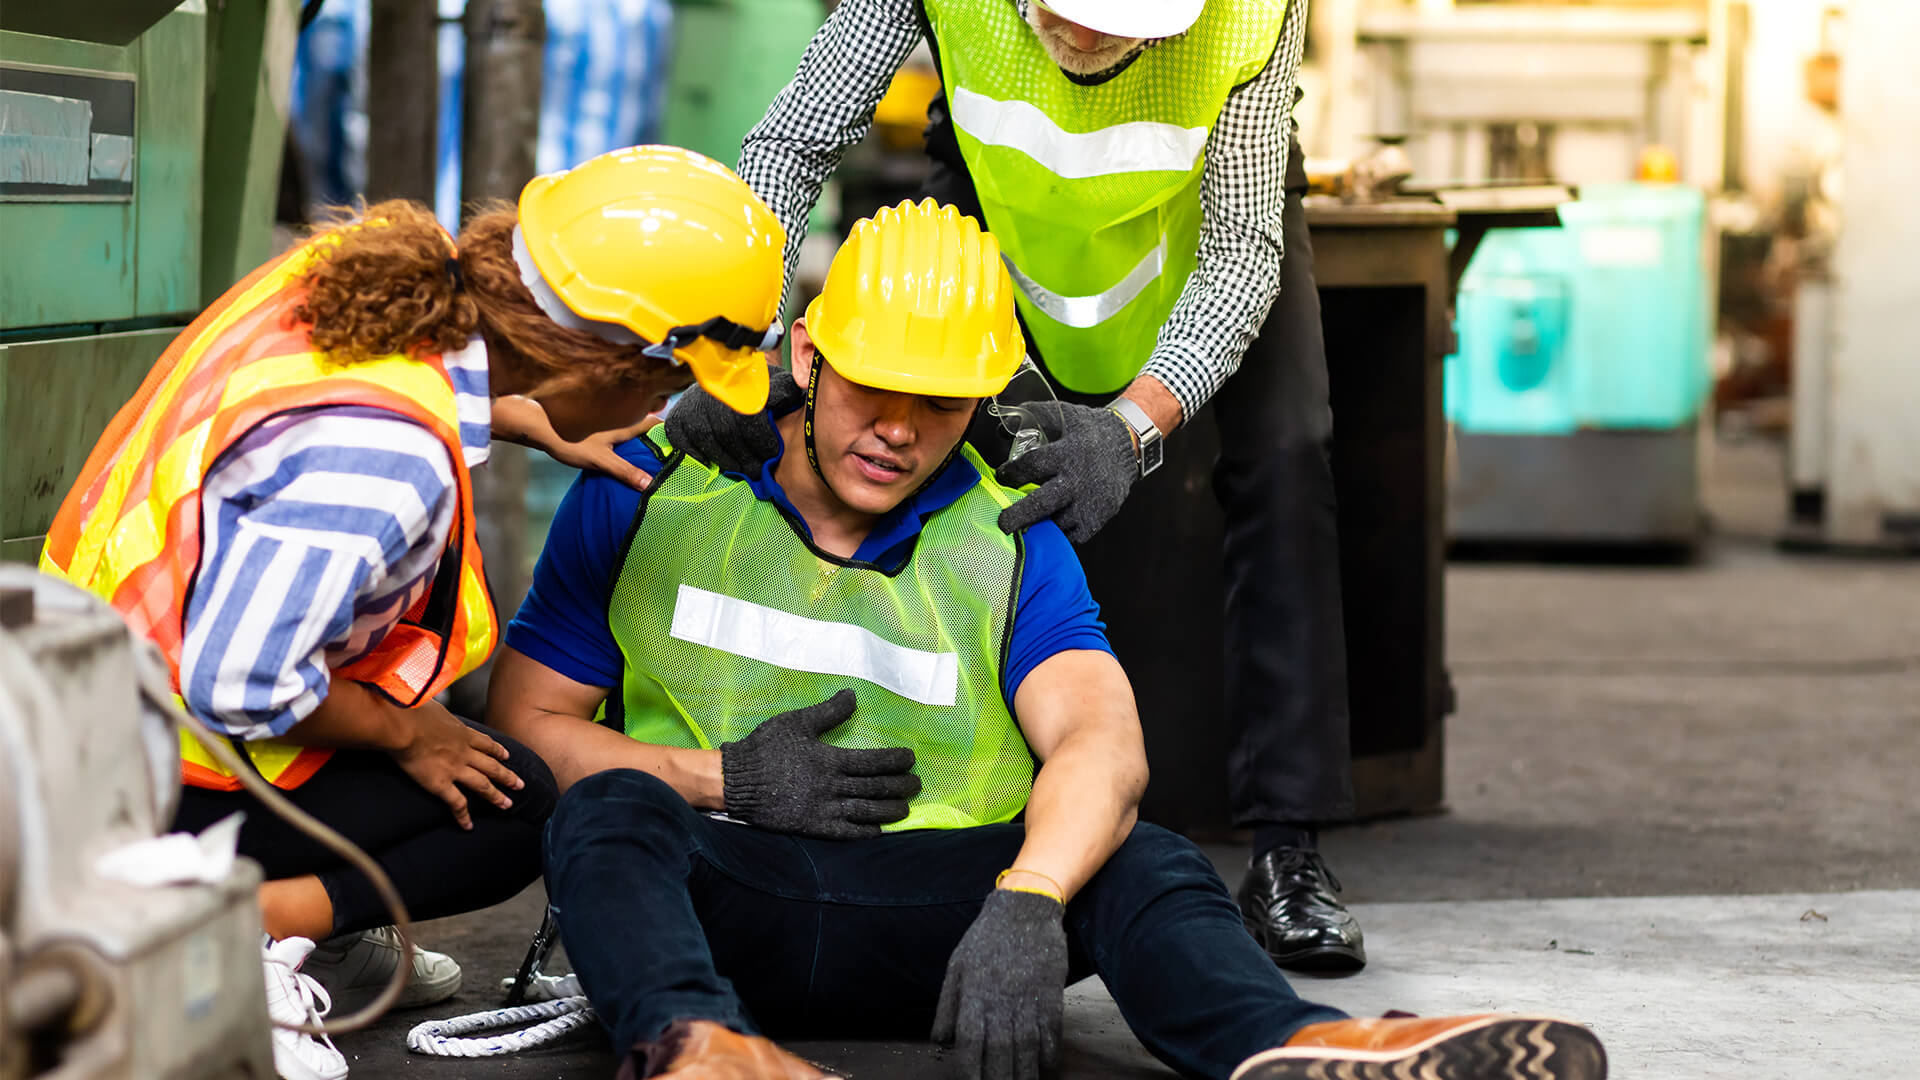 workplace injury statistics, published in 2020 and 2021 by the U.S. Bureau of Labor Statistics i.e (BLS)